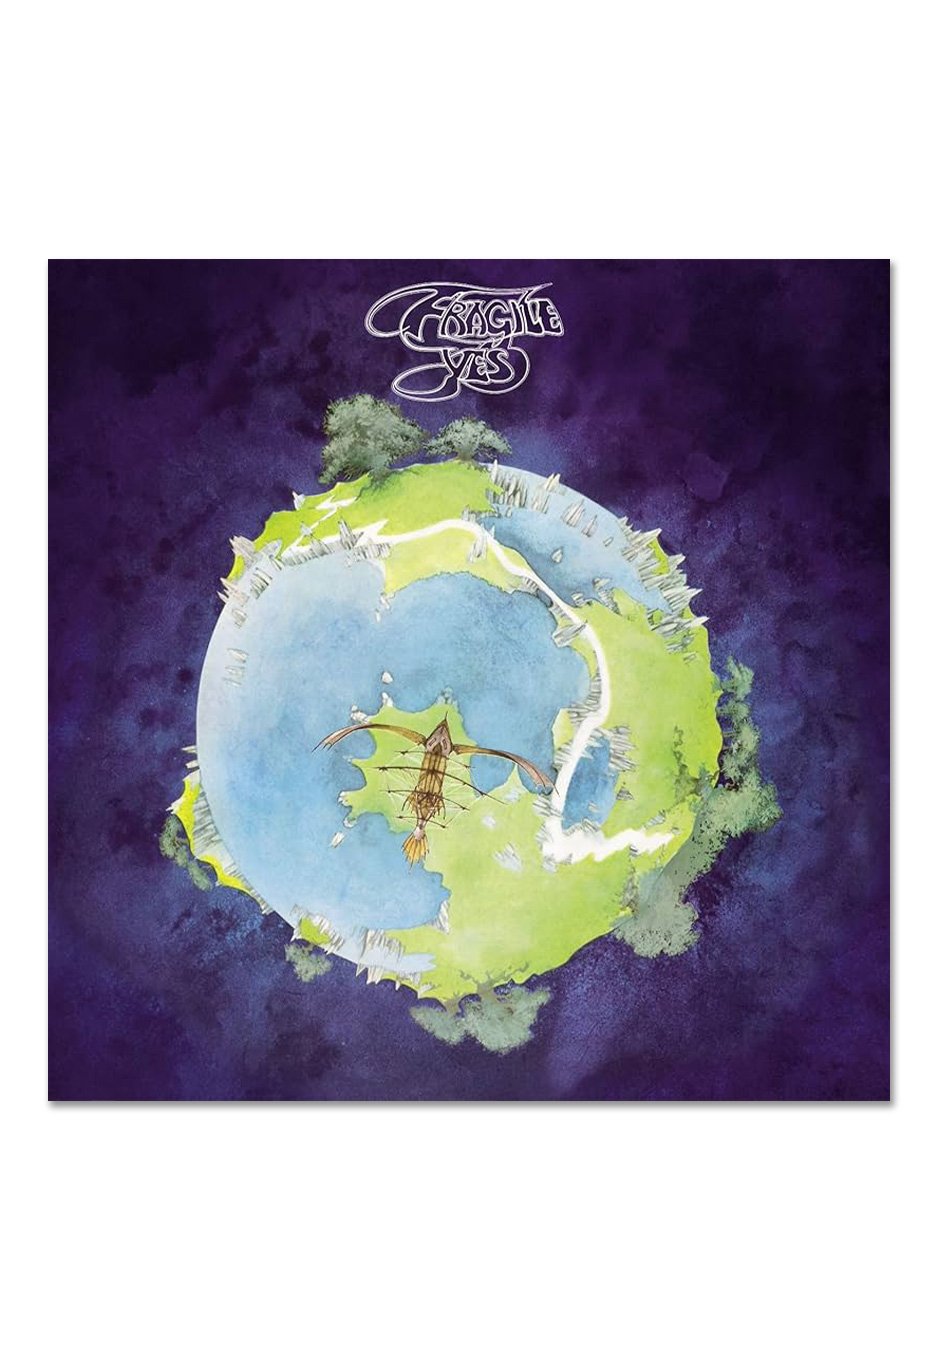 Yes - Fragile (Super Deluxe Edition) - Vinyl + 4 CD + Blu Ray Boxset